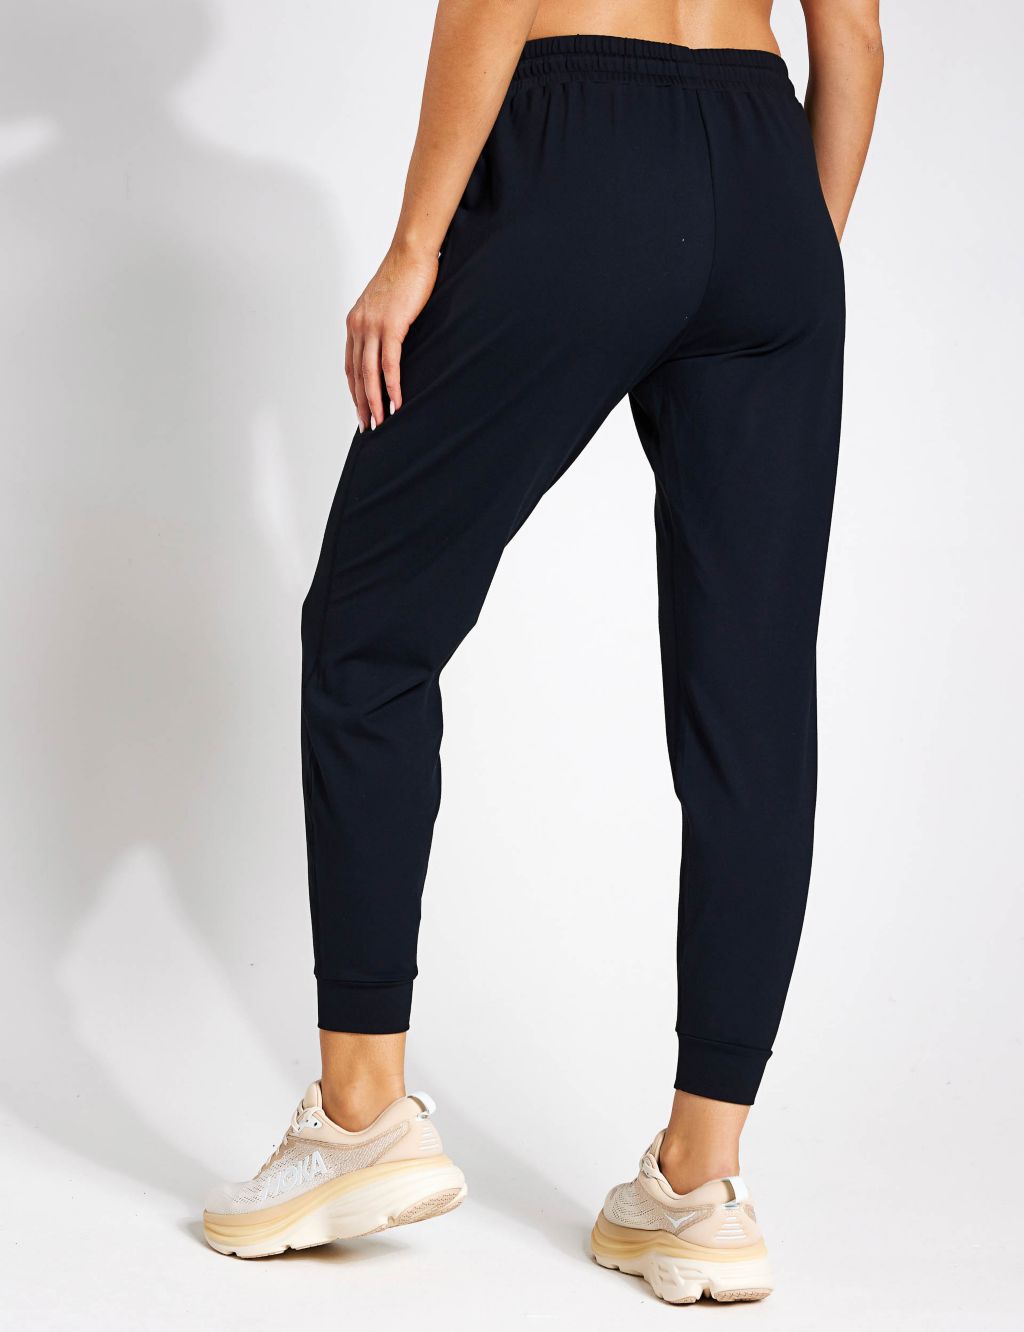 Off Duty Cuffed Ankle Grazer Joggers image 4